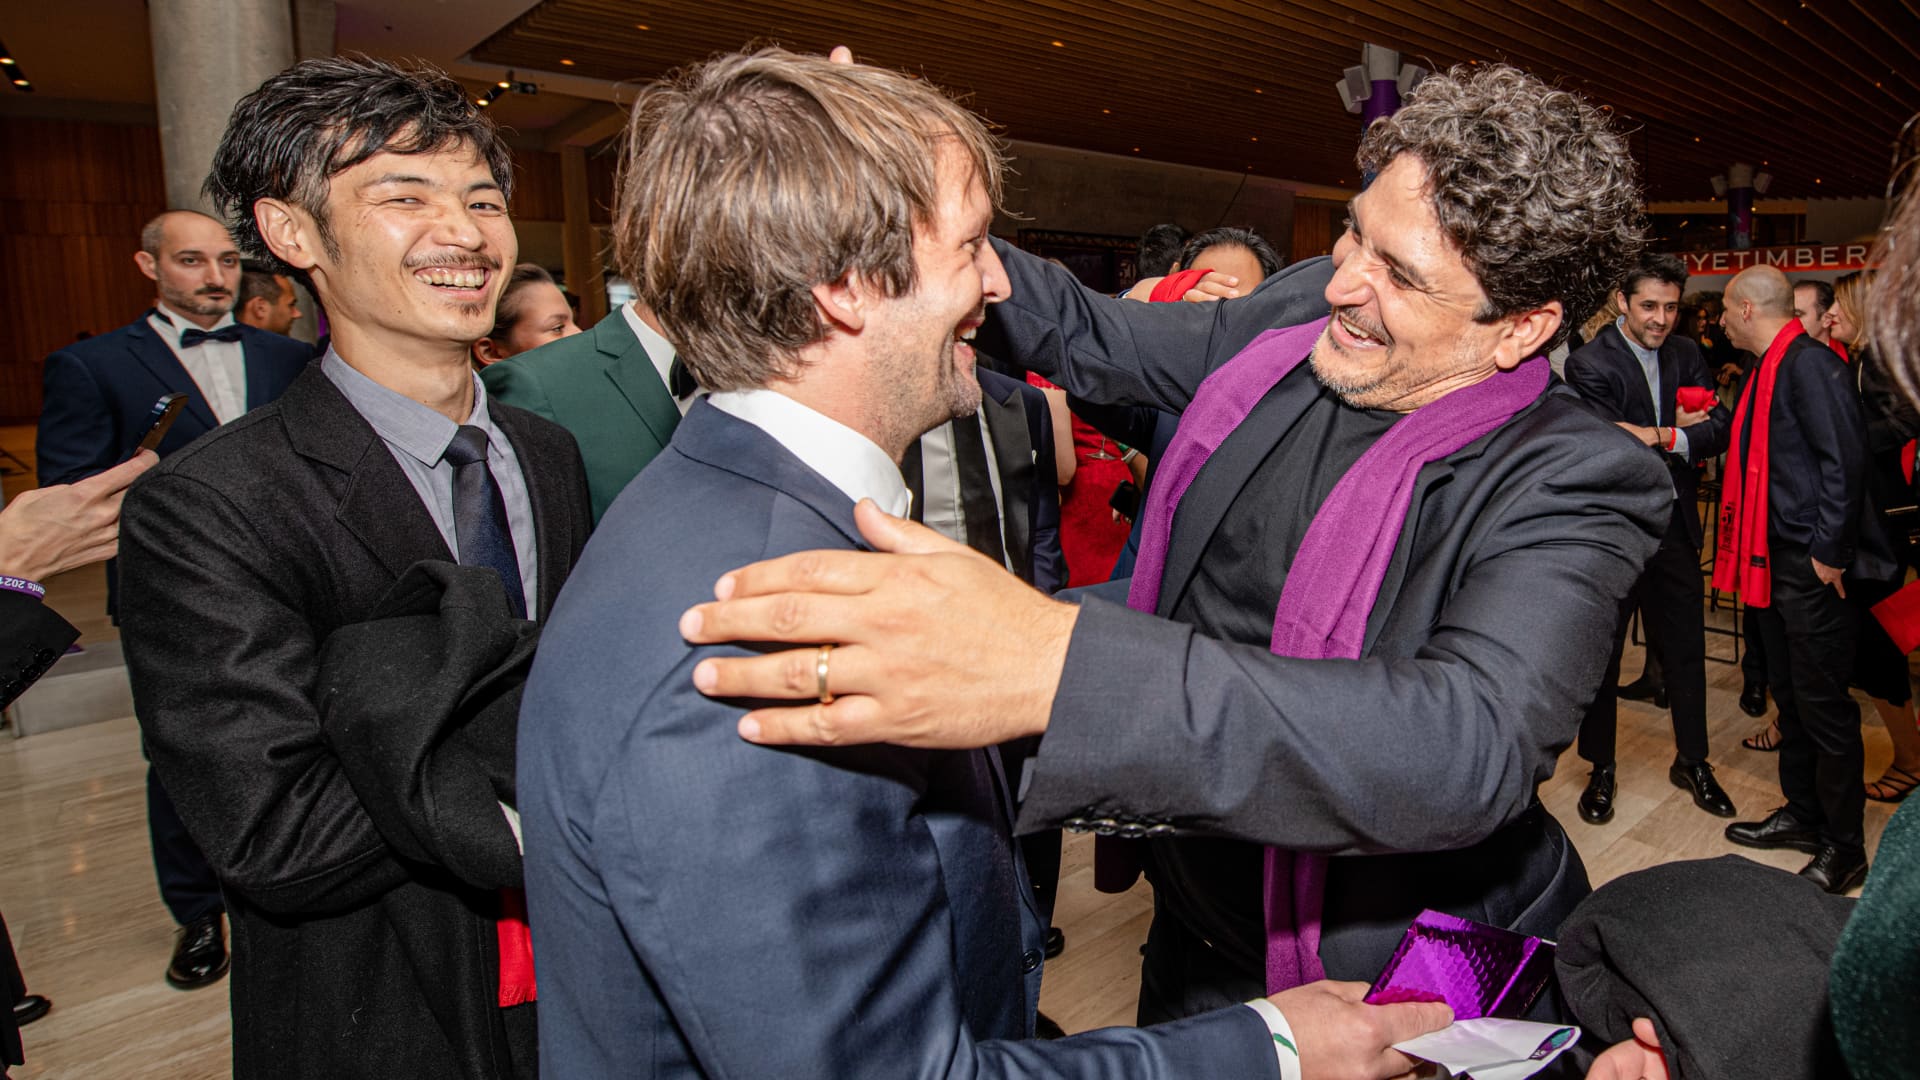 Noma's Rene Redzepi (L) is congratulated by Chef Mauro Colagreco (R) of France's Mirazur restaurant at the awards ceremony of the 'World's 50 Best Restaurants 2021', in Antwerp, Belgium on Tuesday, Oct. 5, 2021.